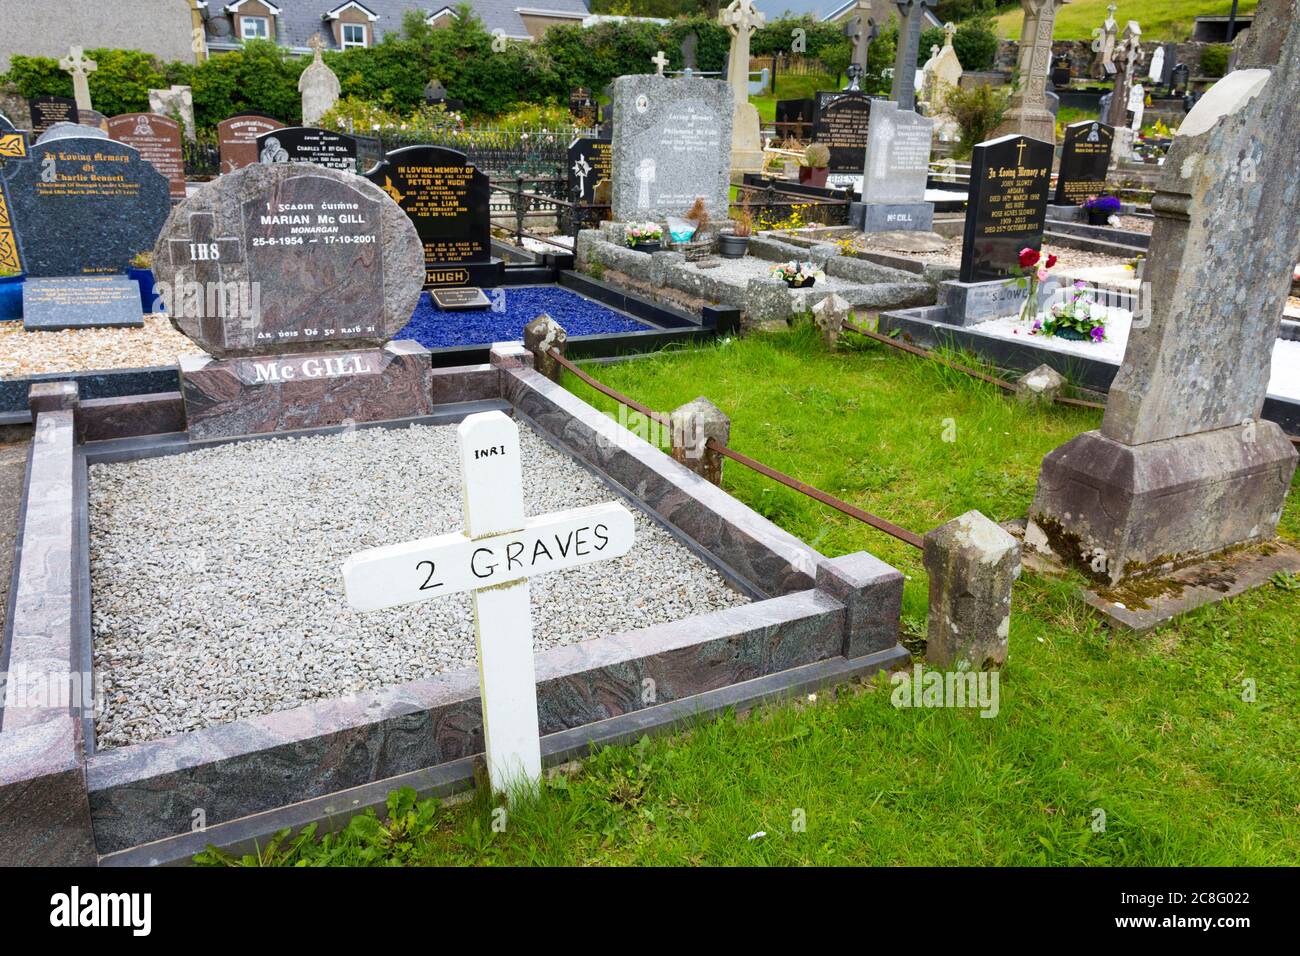 Reserved plots in a graveyard, County Donegal, Ireland Stock Photo